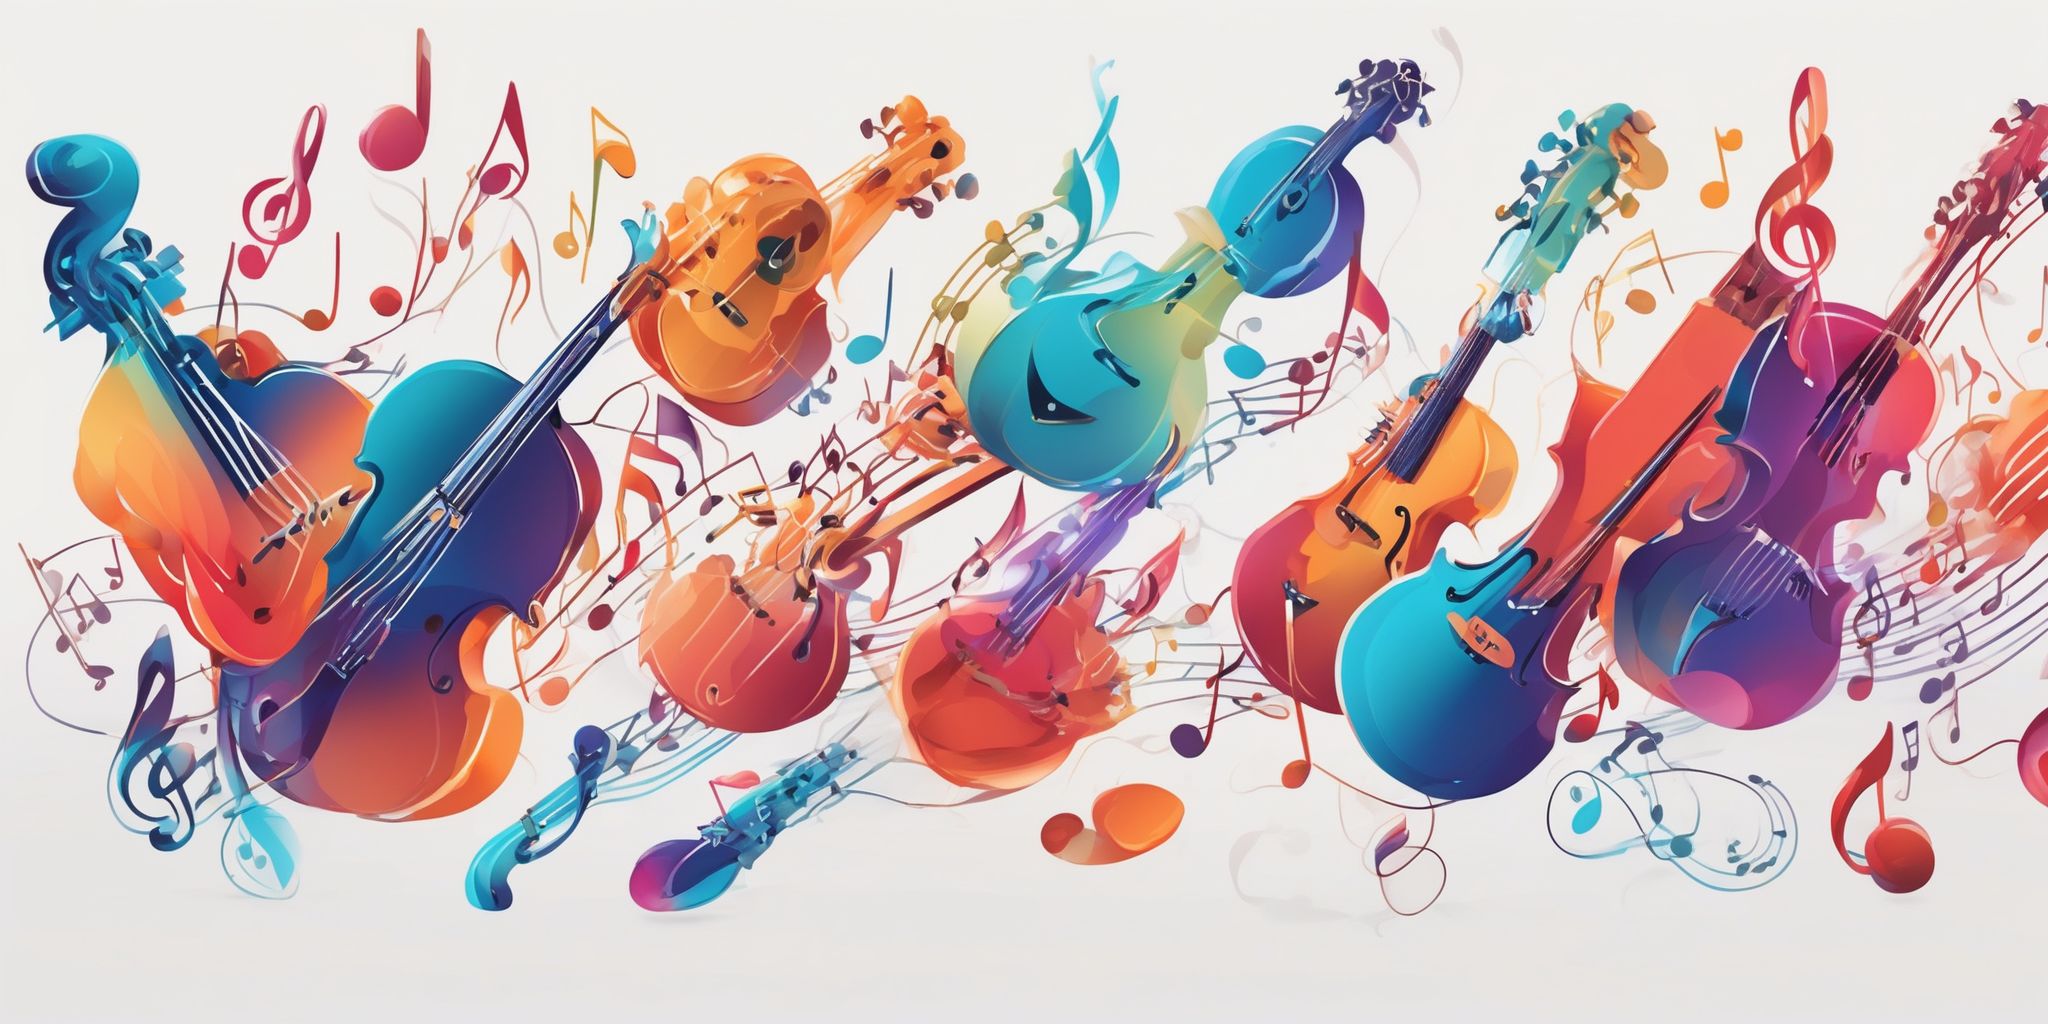 Musical harmony in illustration style with gradients and white background